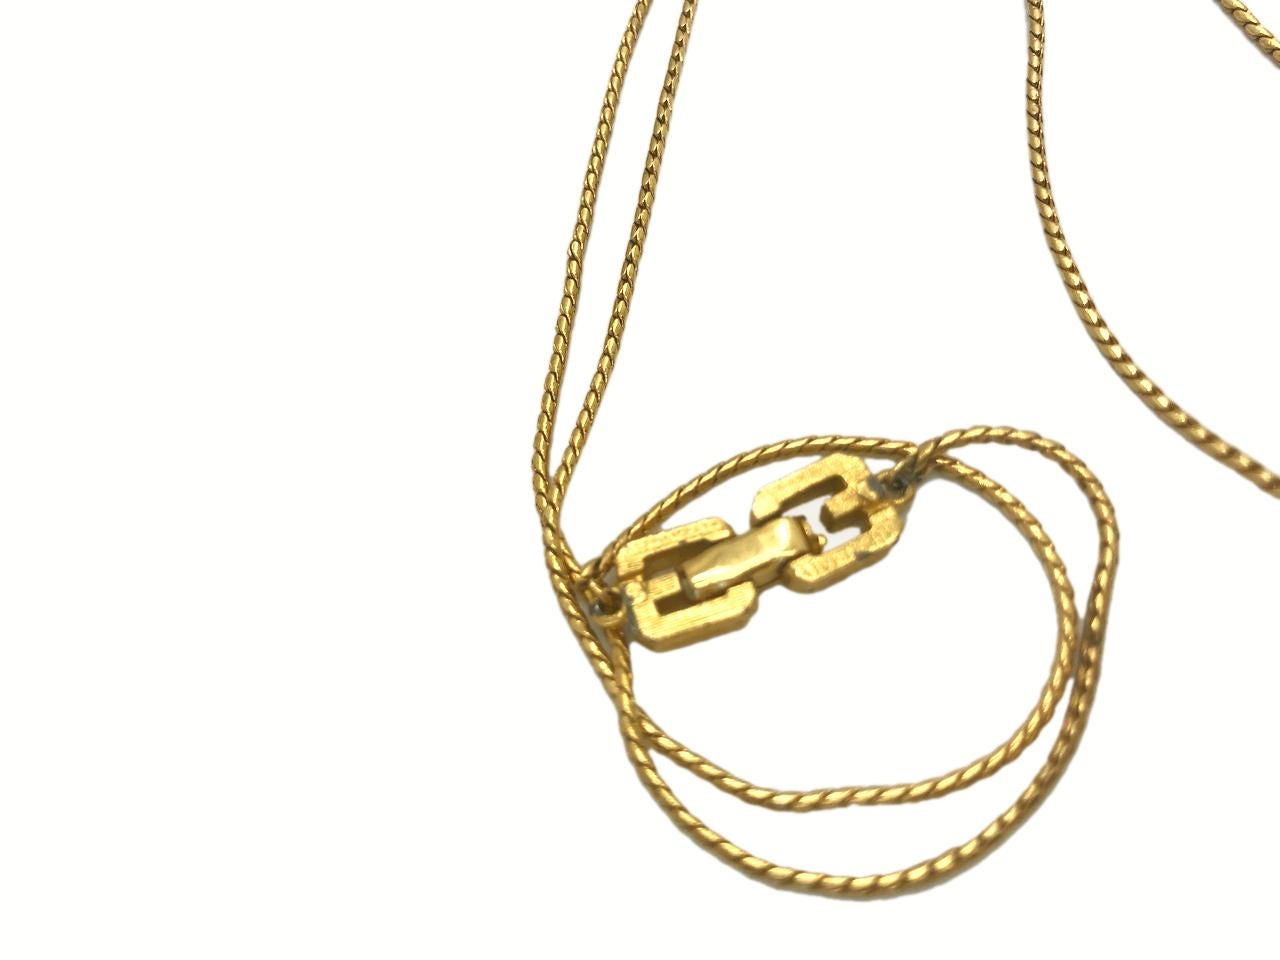 Givenchy 1970s Gold Plated G Logo Pendant Necklace   im Zustand „Gut“ in London, GB